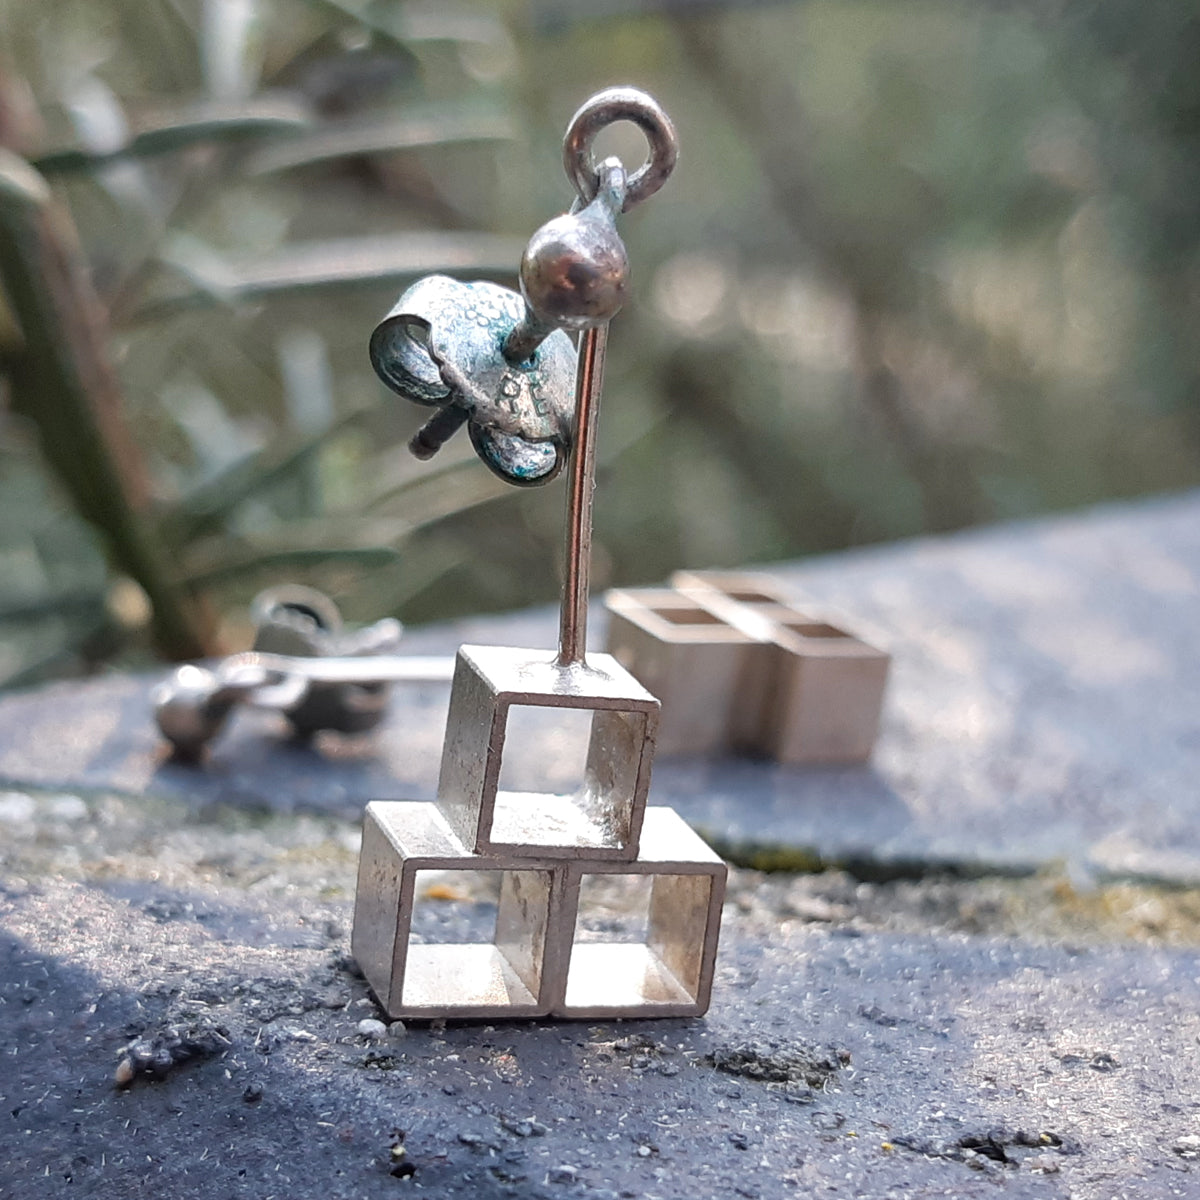 Vintage Sterling Silver Cube Earrings. Art Deco style. From Moss & Rose a Rural Magpie Exhibitor.